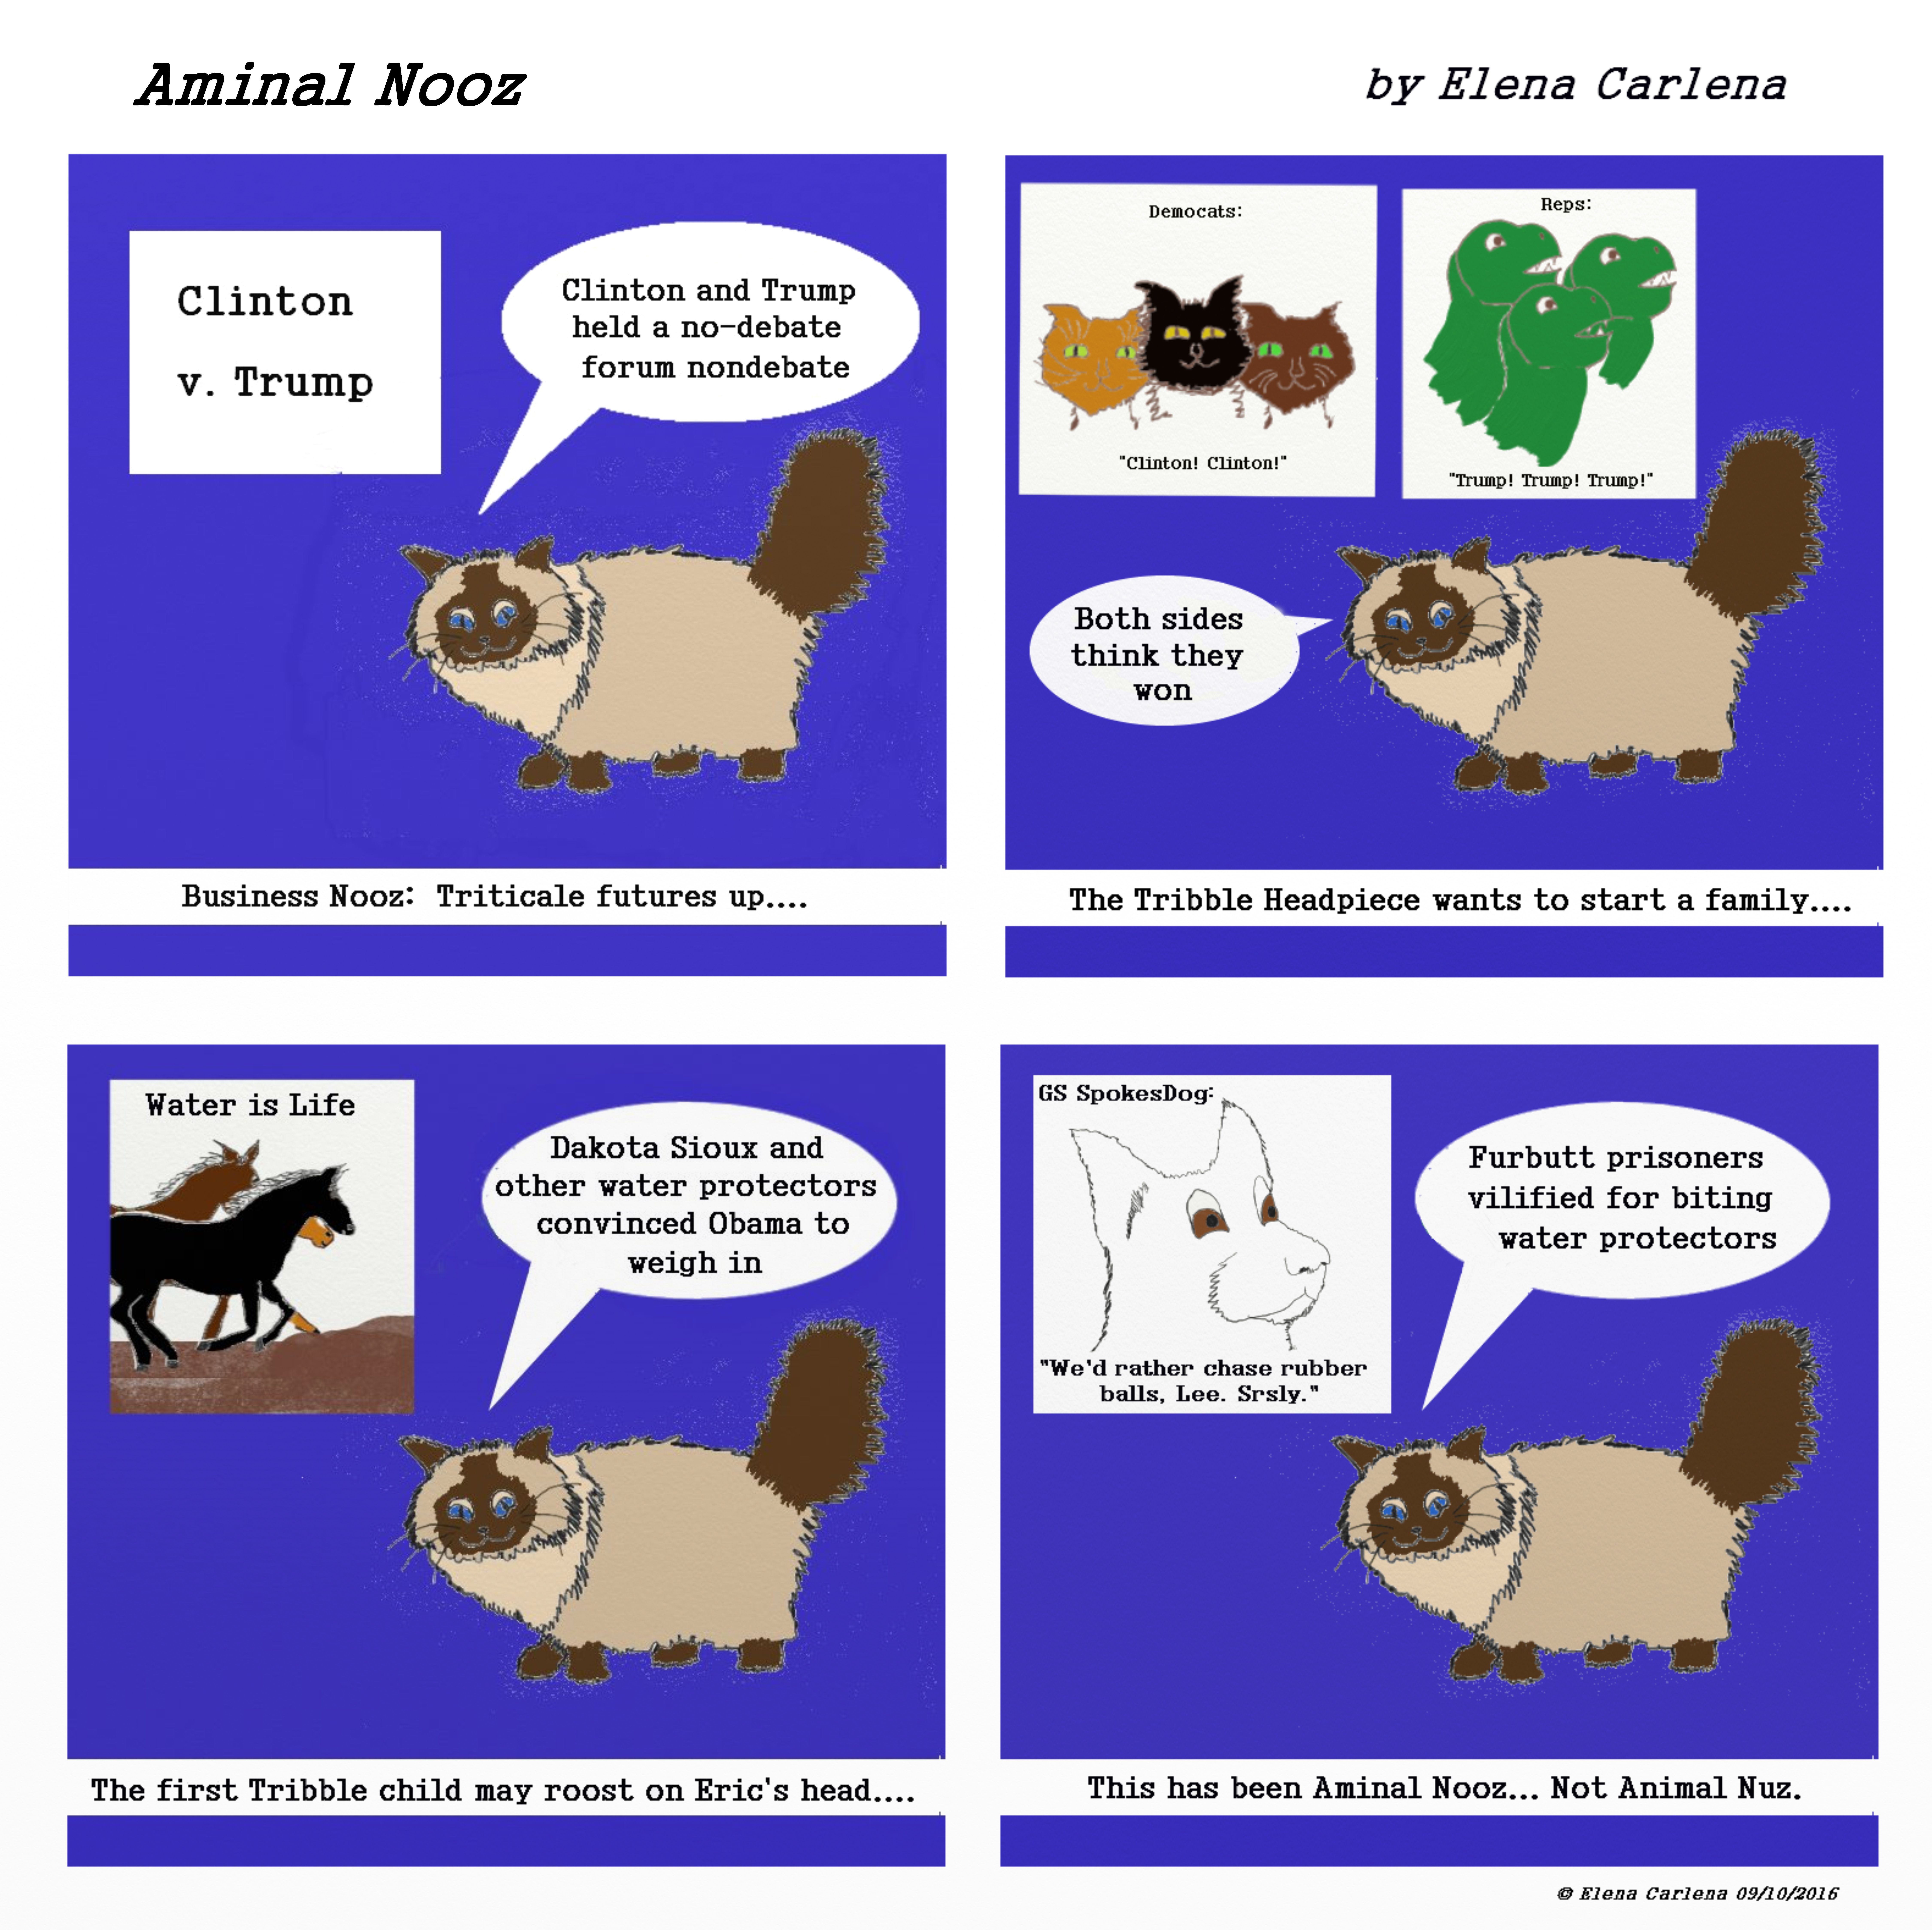 First Aminal Nooz cartoon in four panels as appears on shirts